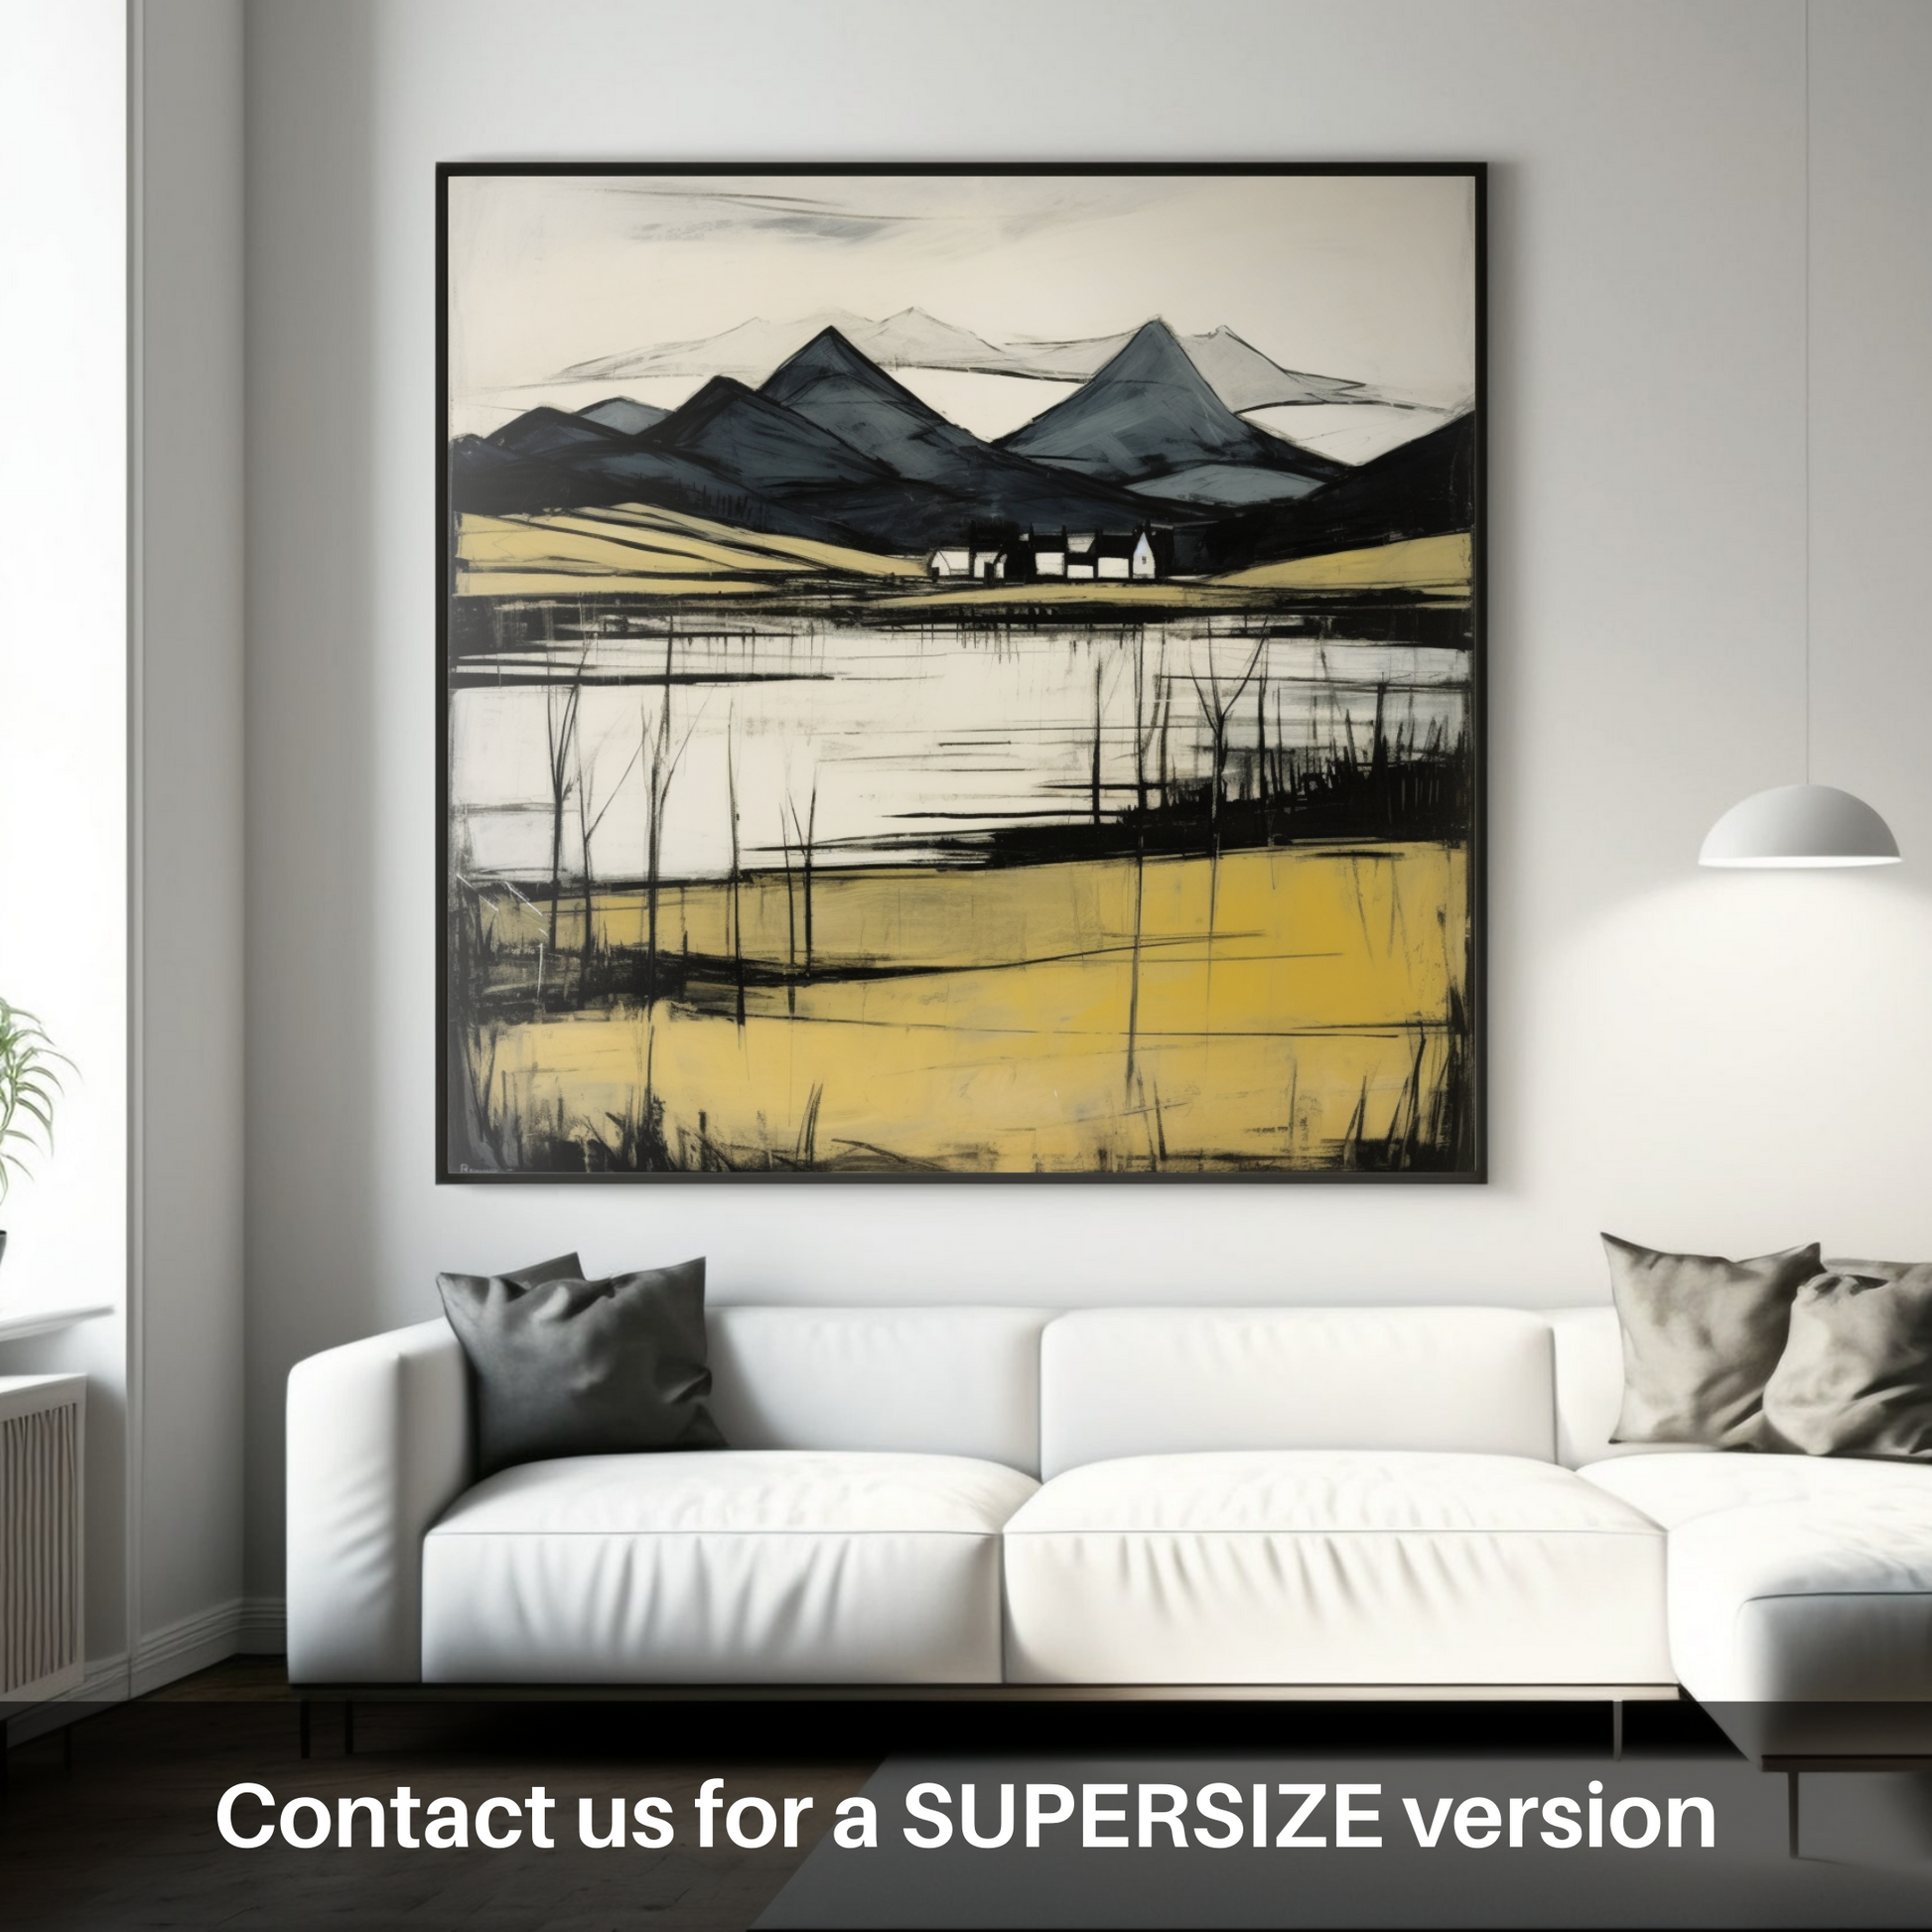 Huge supersize print of Loch Awe, Argyll and Bute